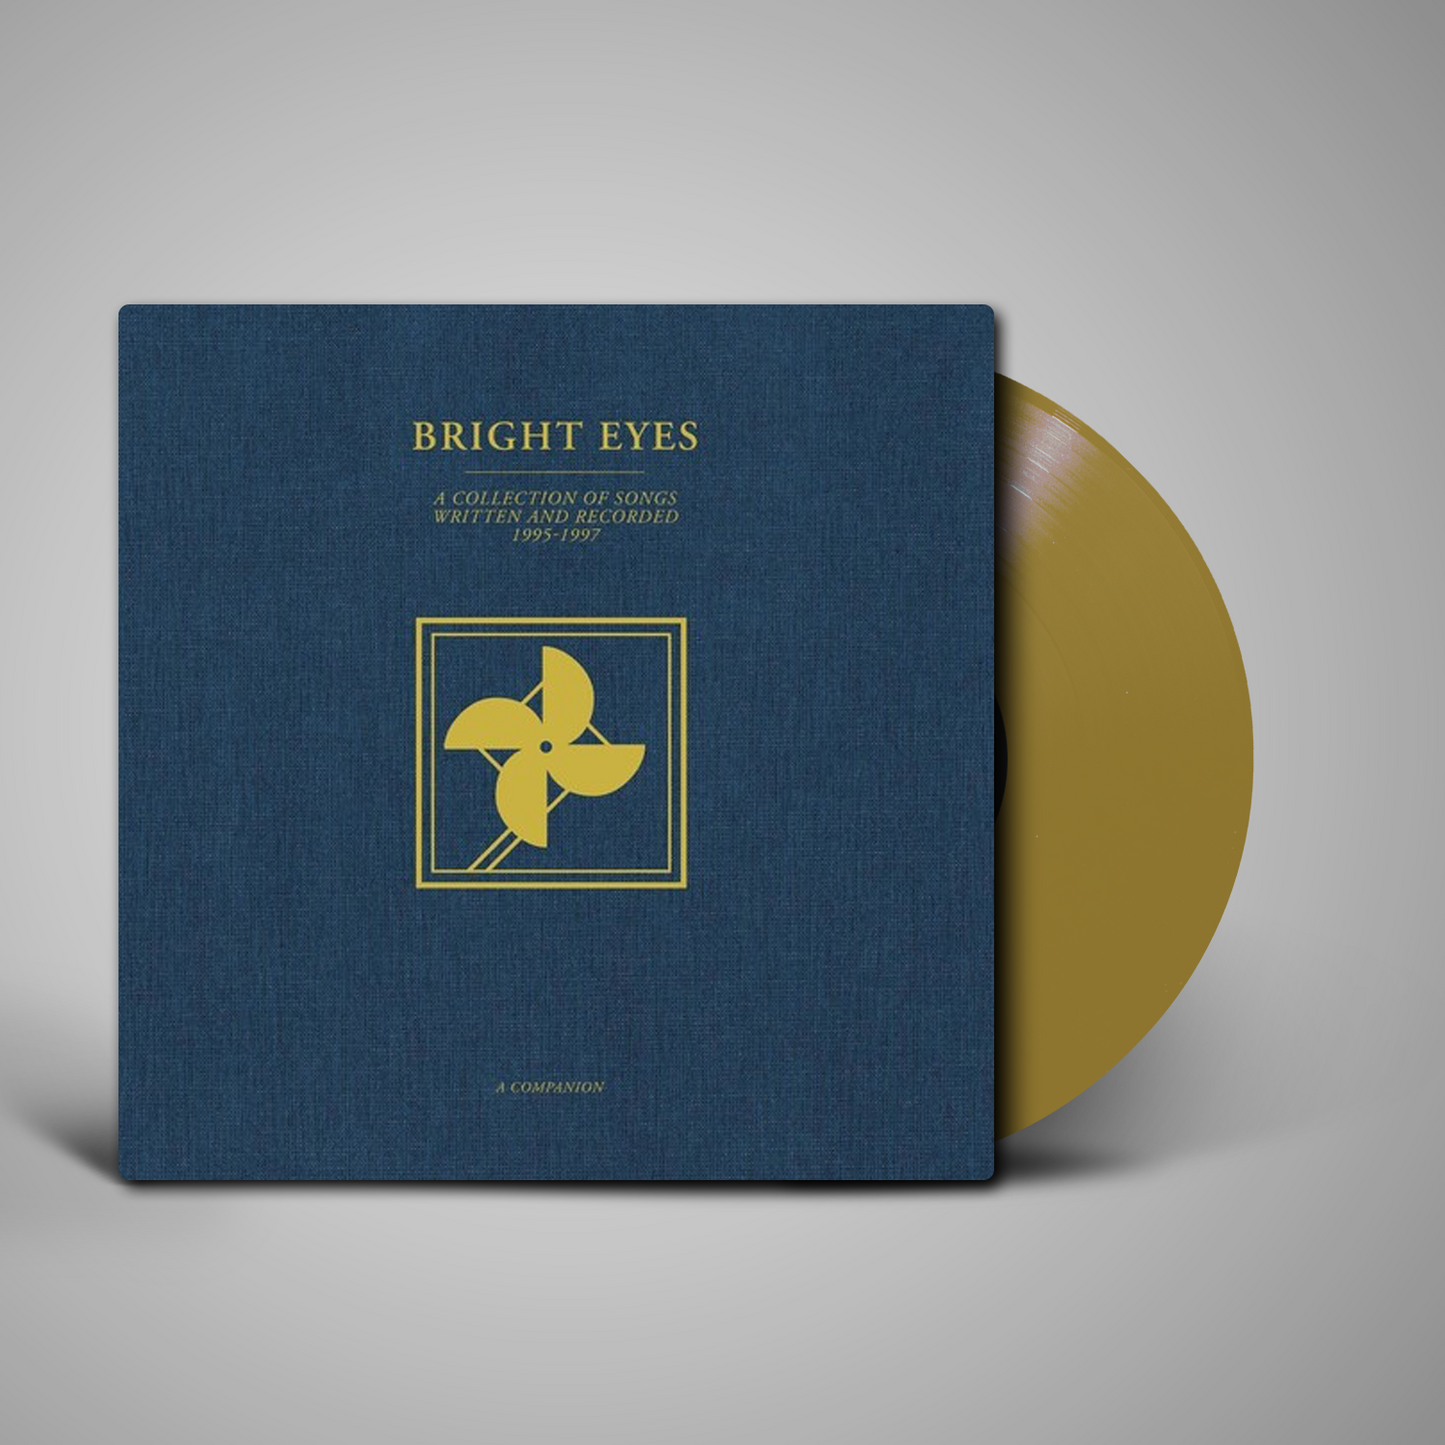 Bright Eyes - A Collection of Songs... : A Companion